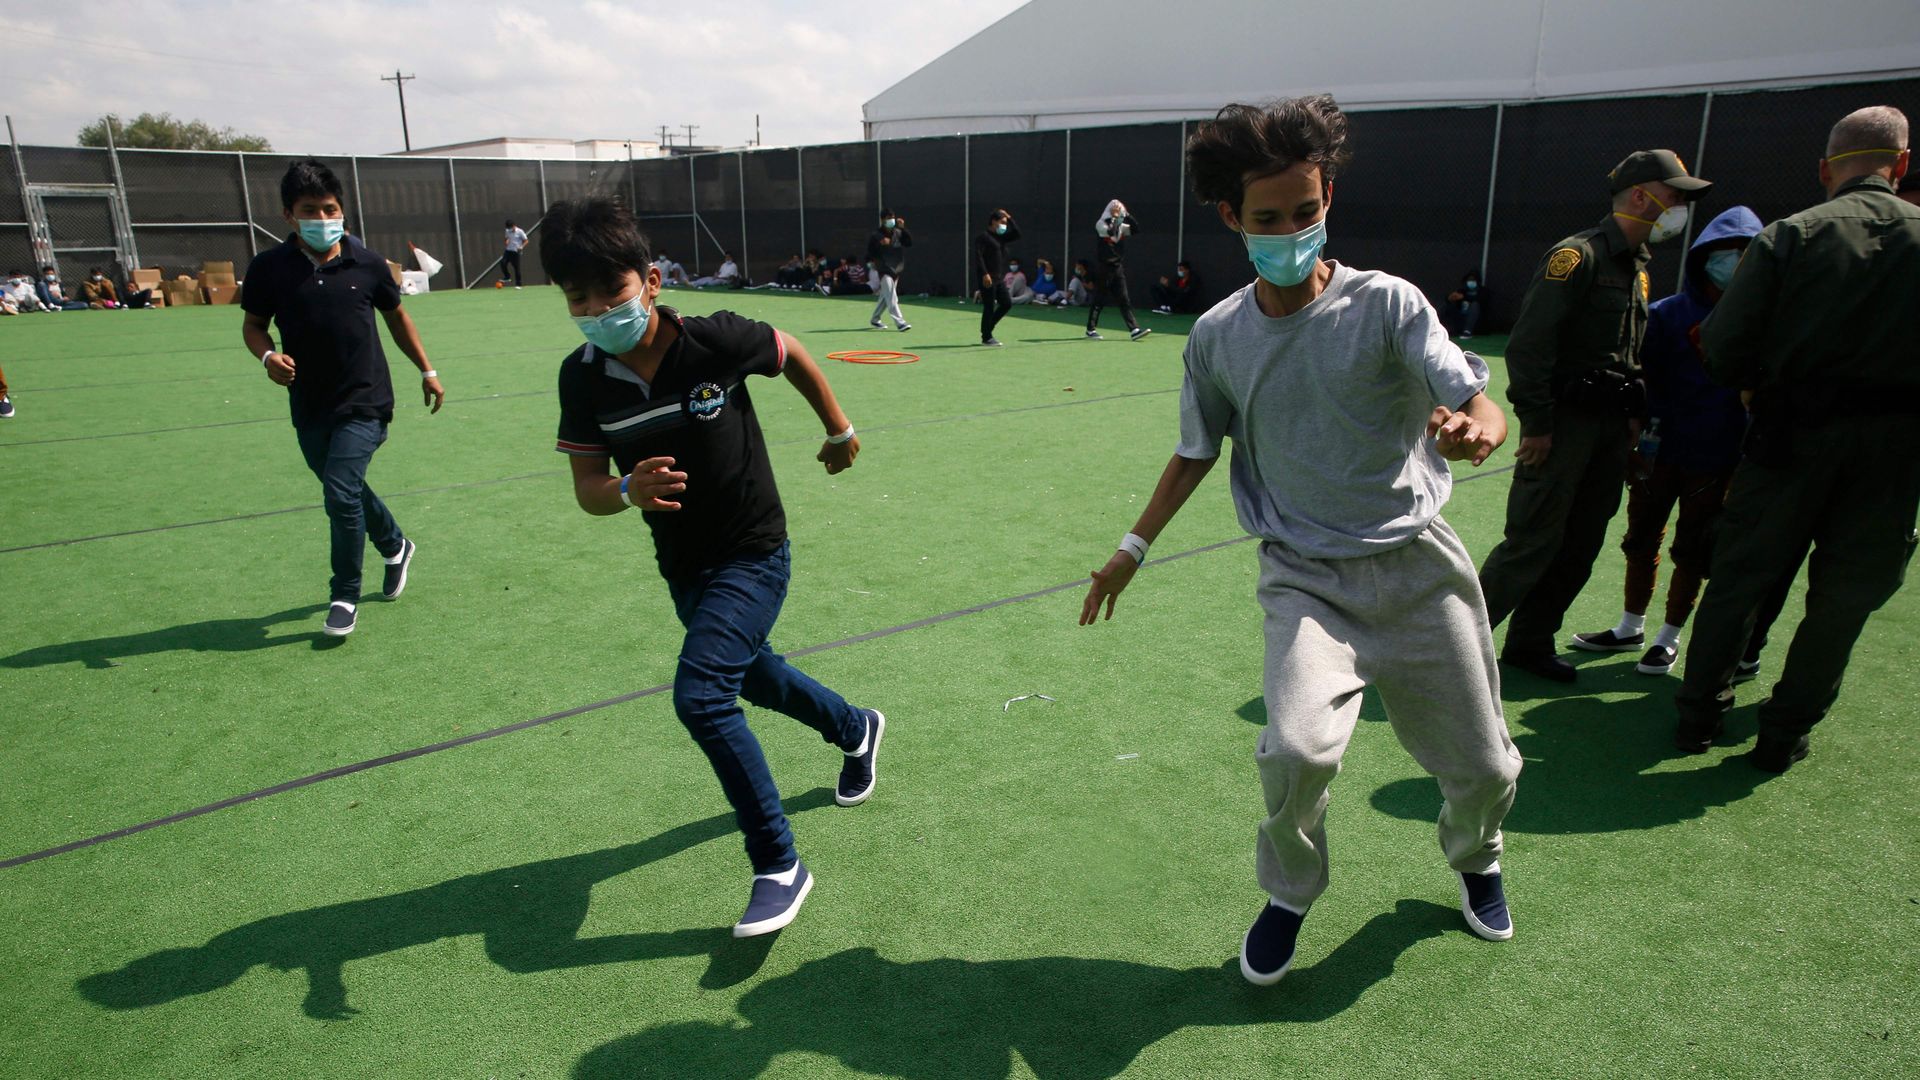 MIgrant minors play soccer at a holding facility in Donna, Texas. 